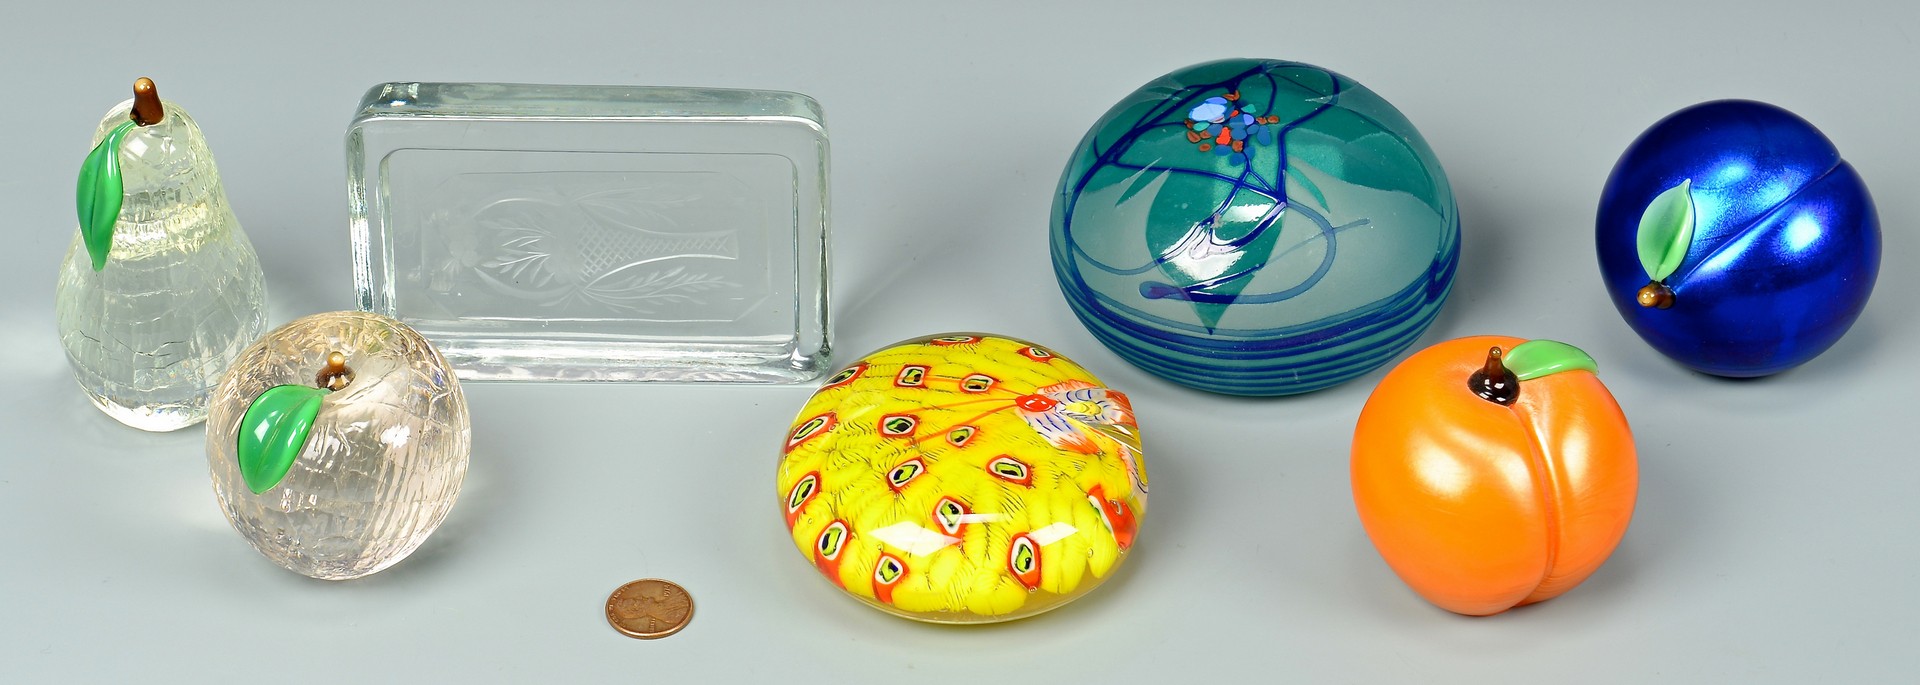 Lot 737: Collection of 7 paperweights